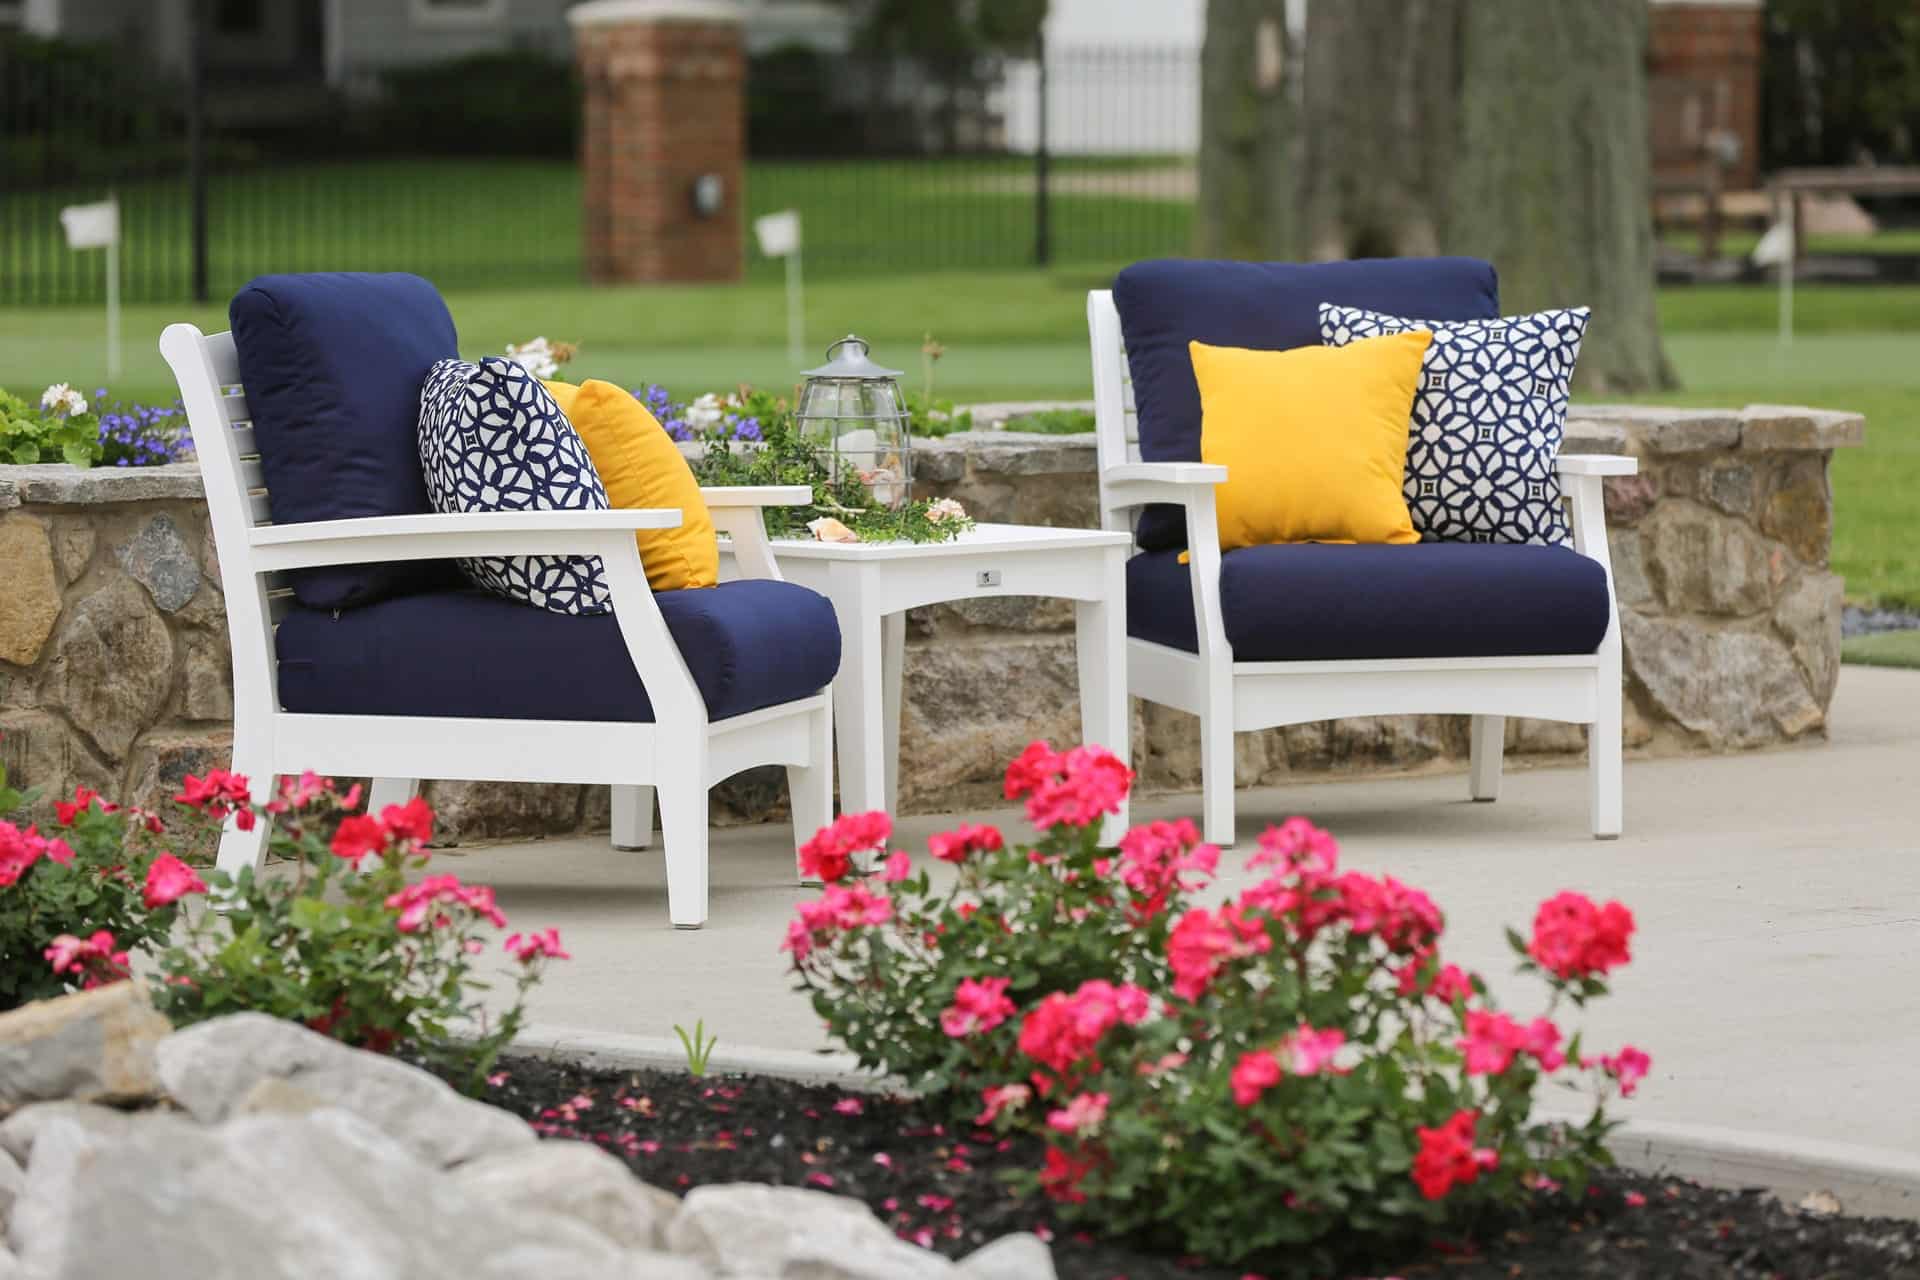 How To Get Patio Cushions To Stay In Place